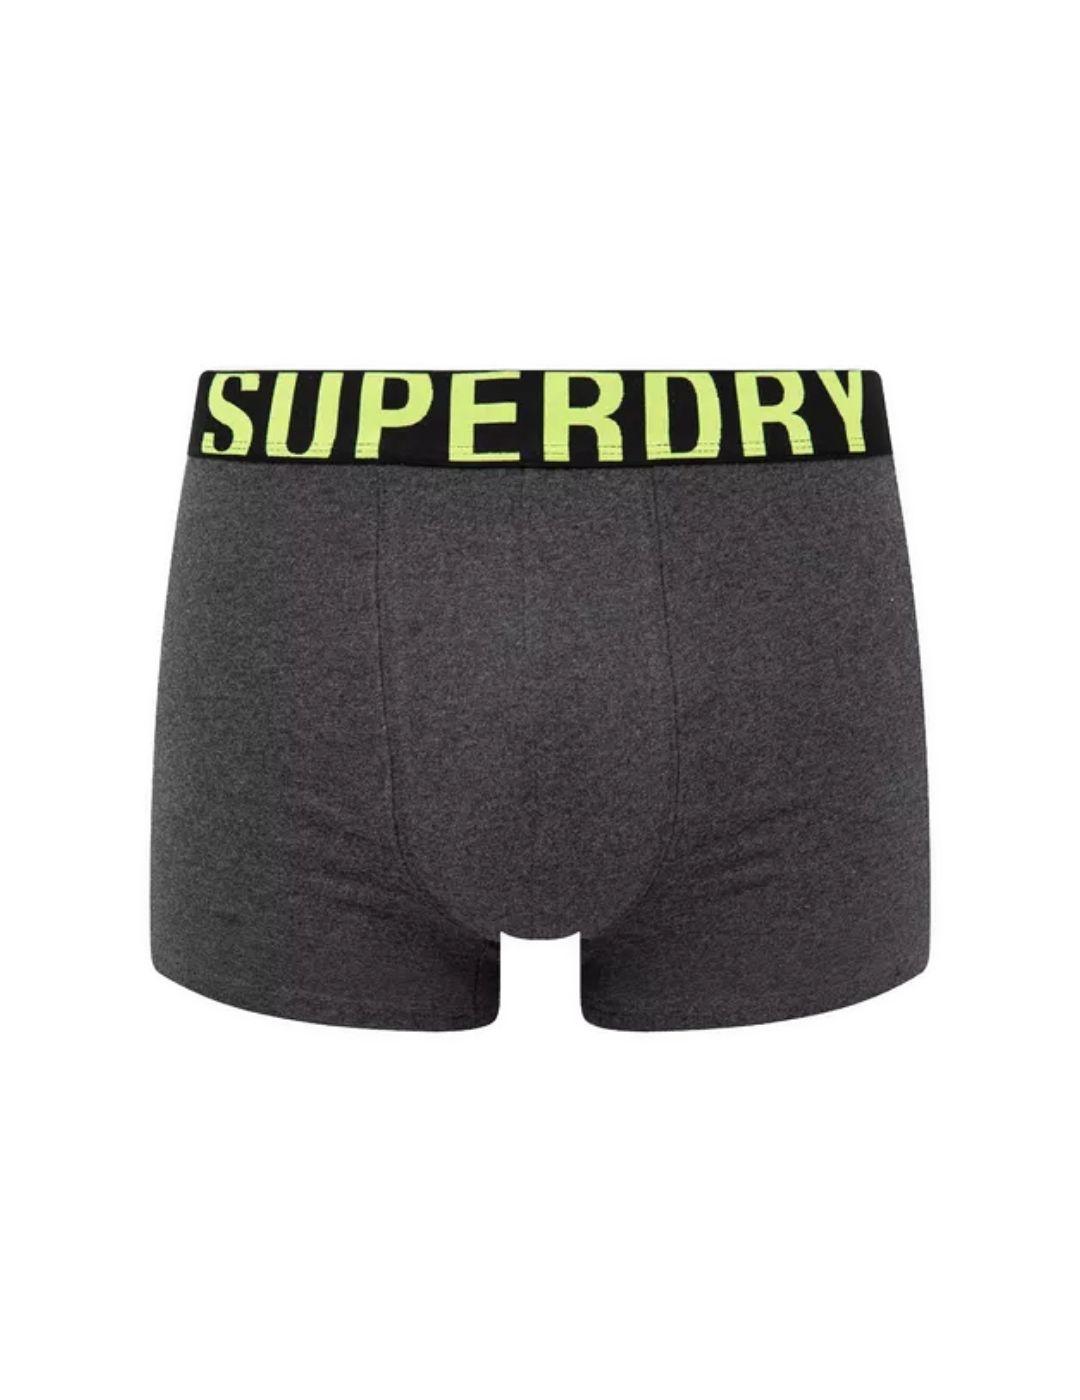 Intimo Superdry pack2 boxer gris para hombre-a